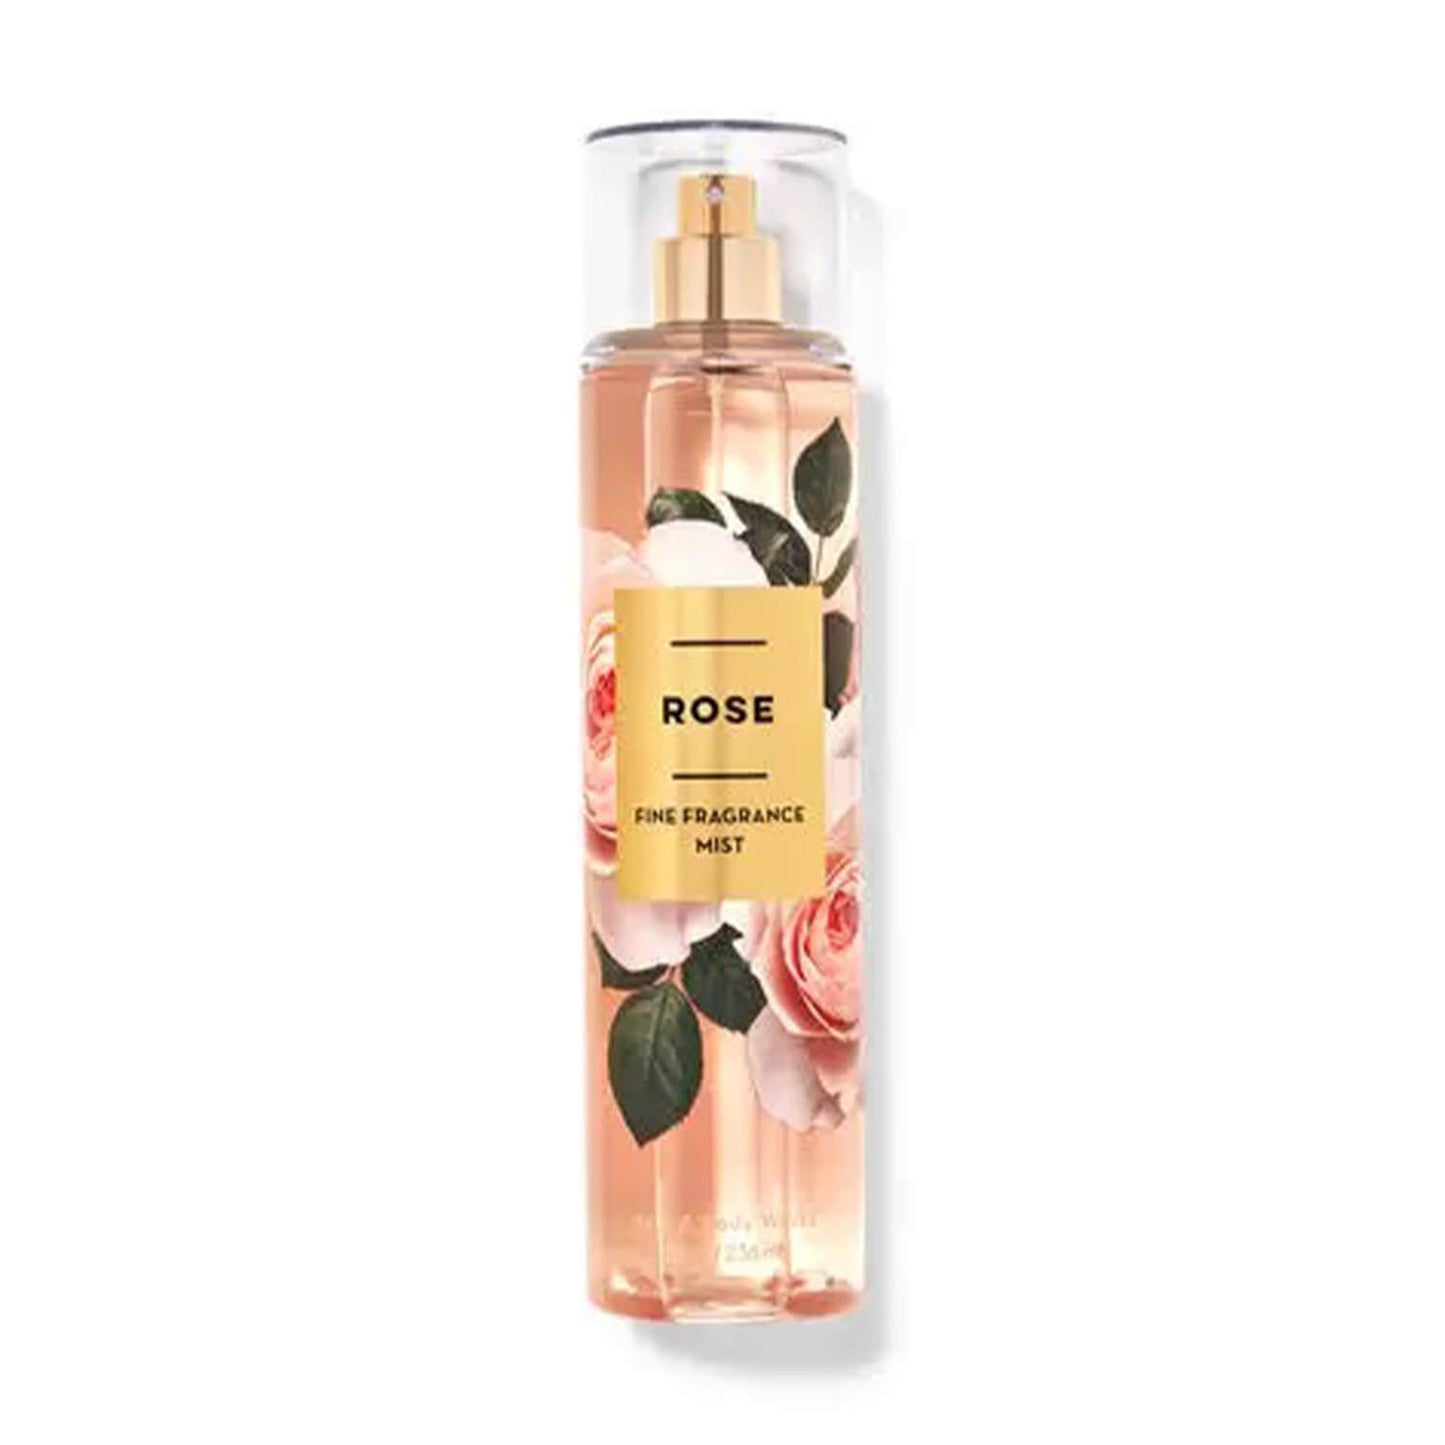 shop bath and body works mist in rose fragrance available at heygirl.pk for delivery in Pakistan